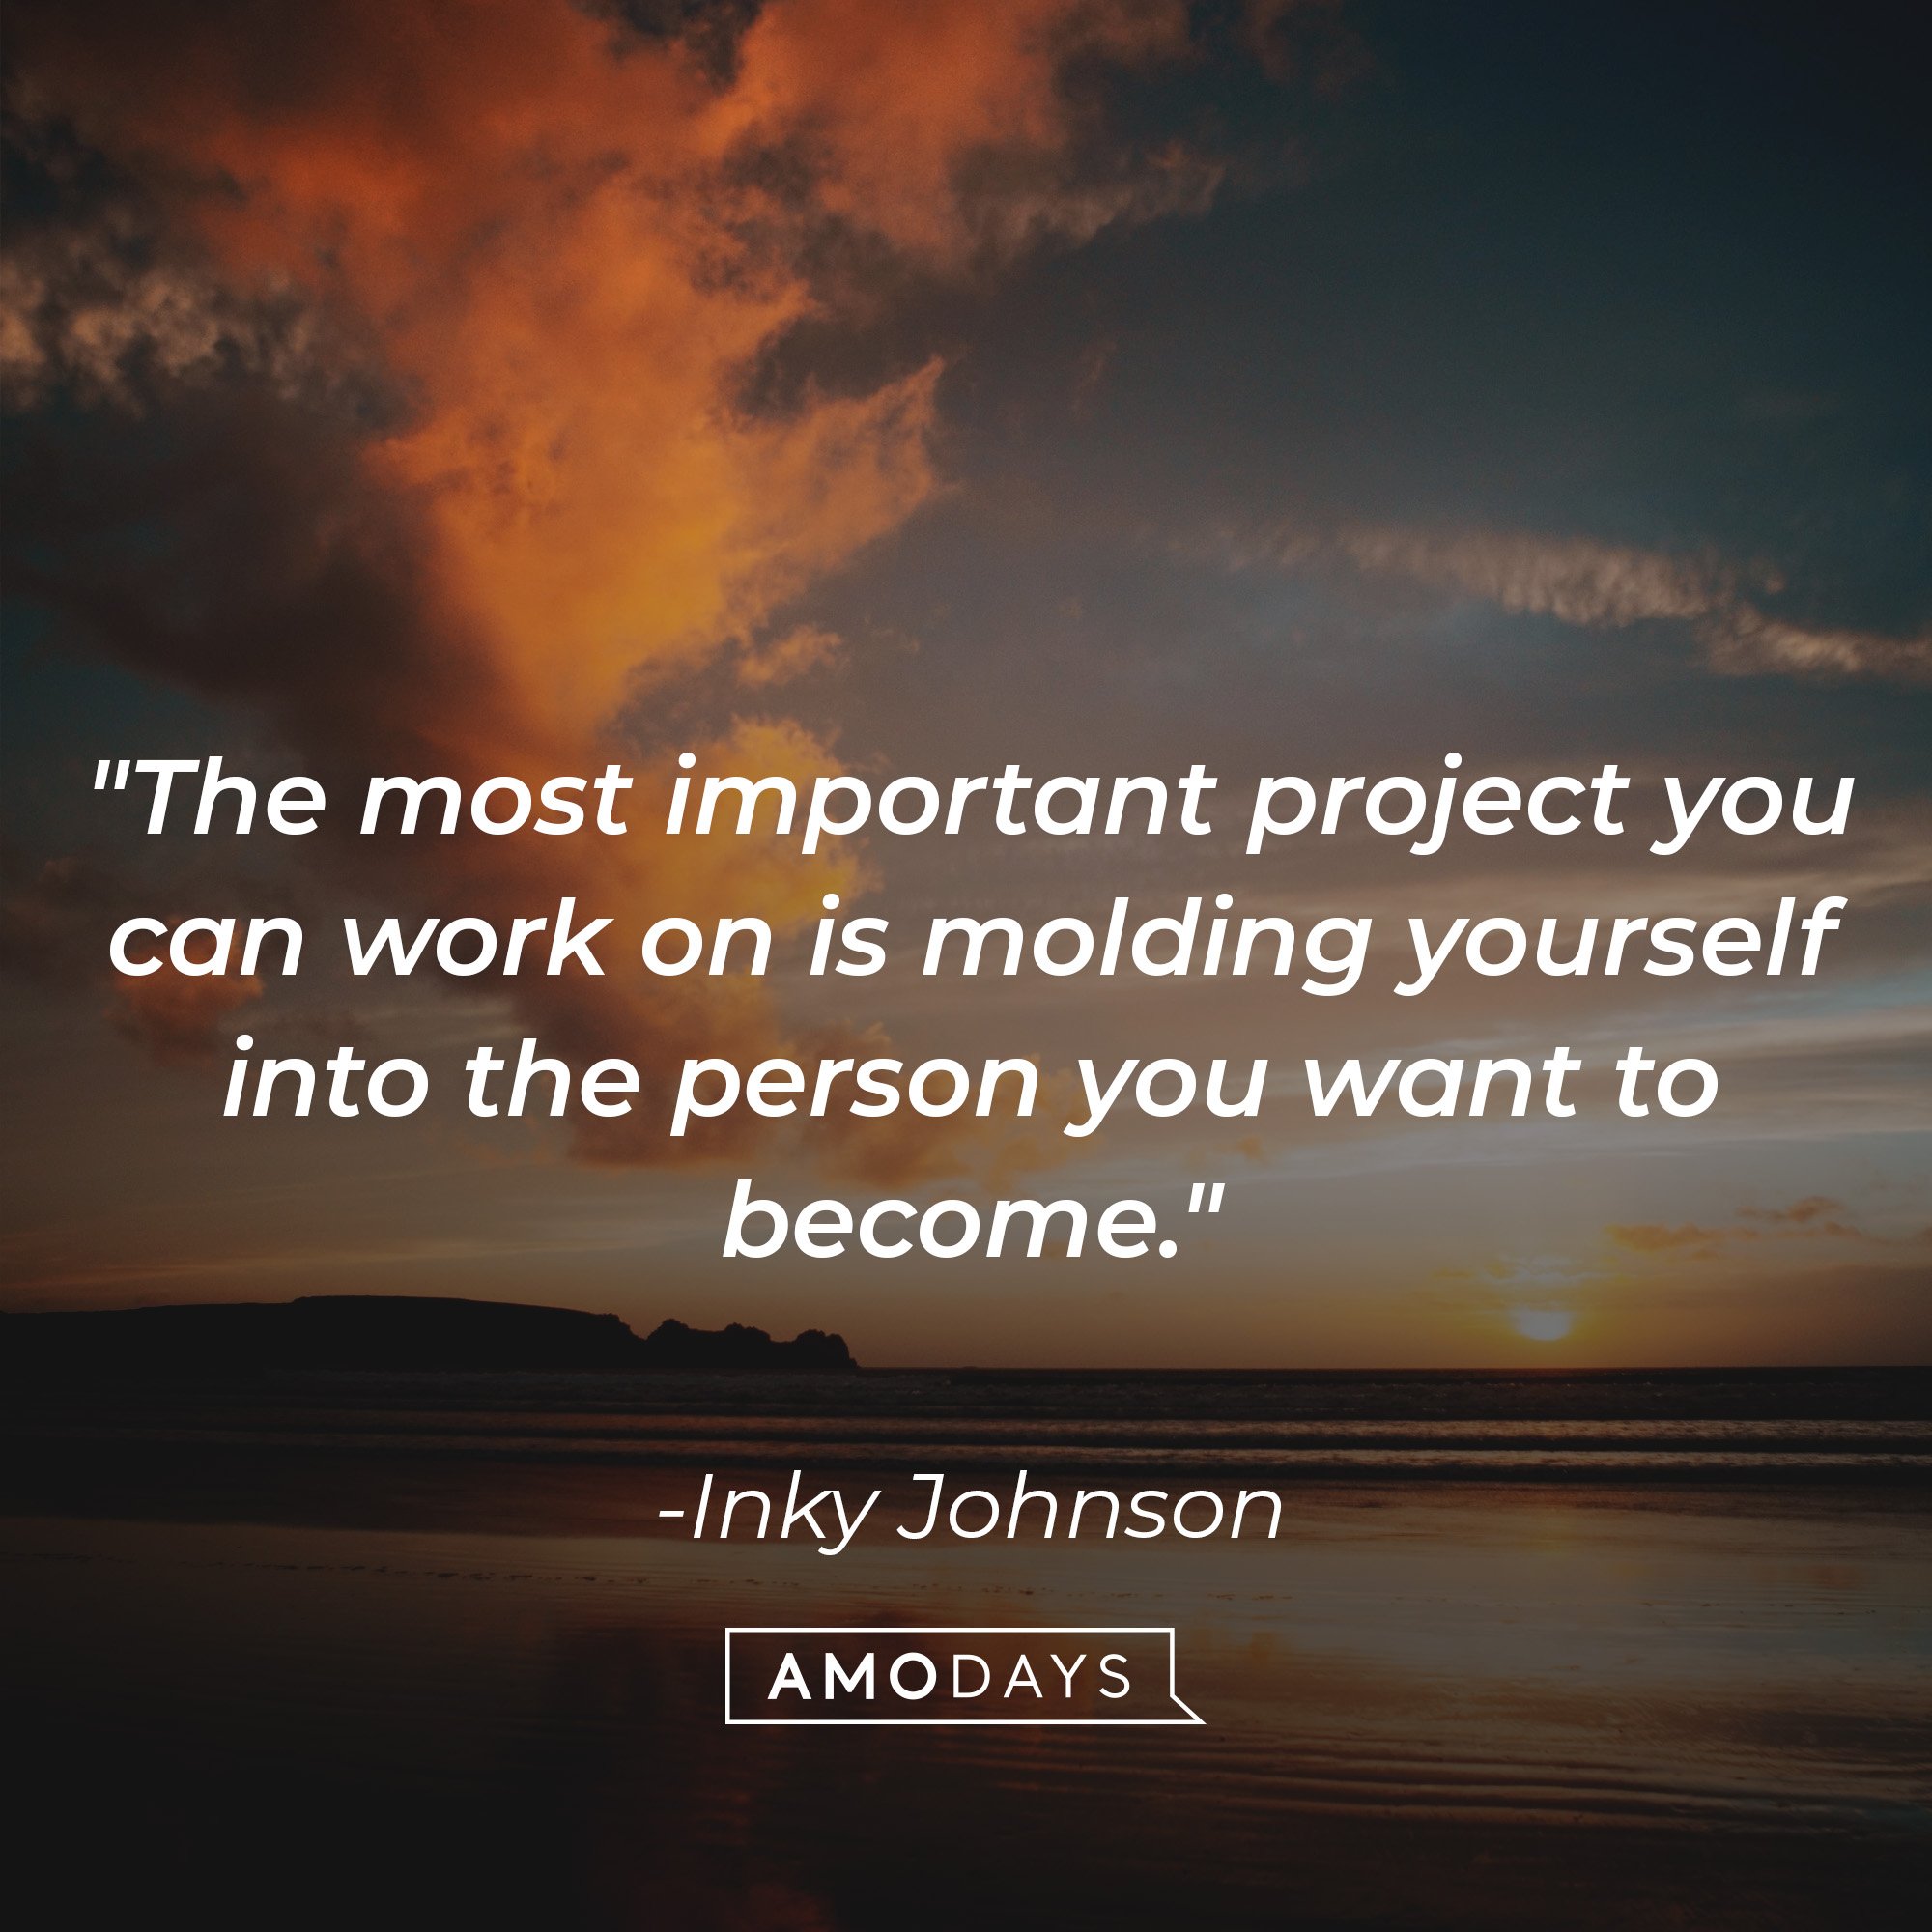 Inky Johnson's quote: "The most important project you can work on is molding yourself into the person you want to become." | Image: AmoDays